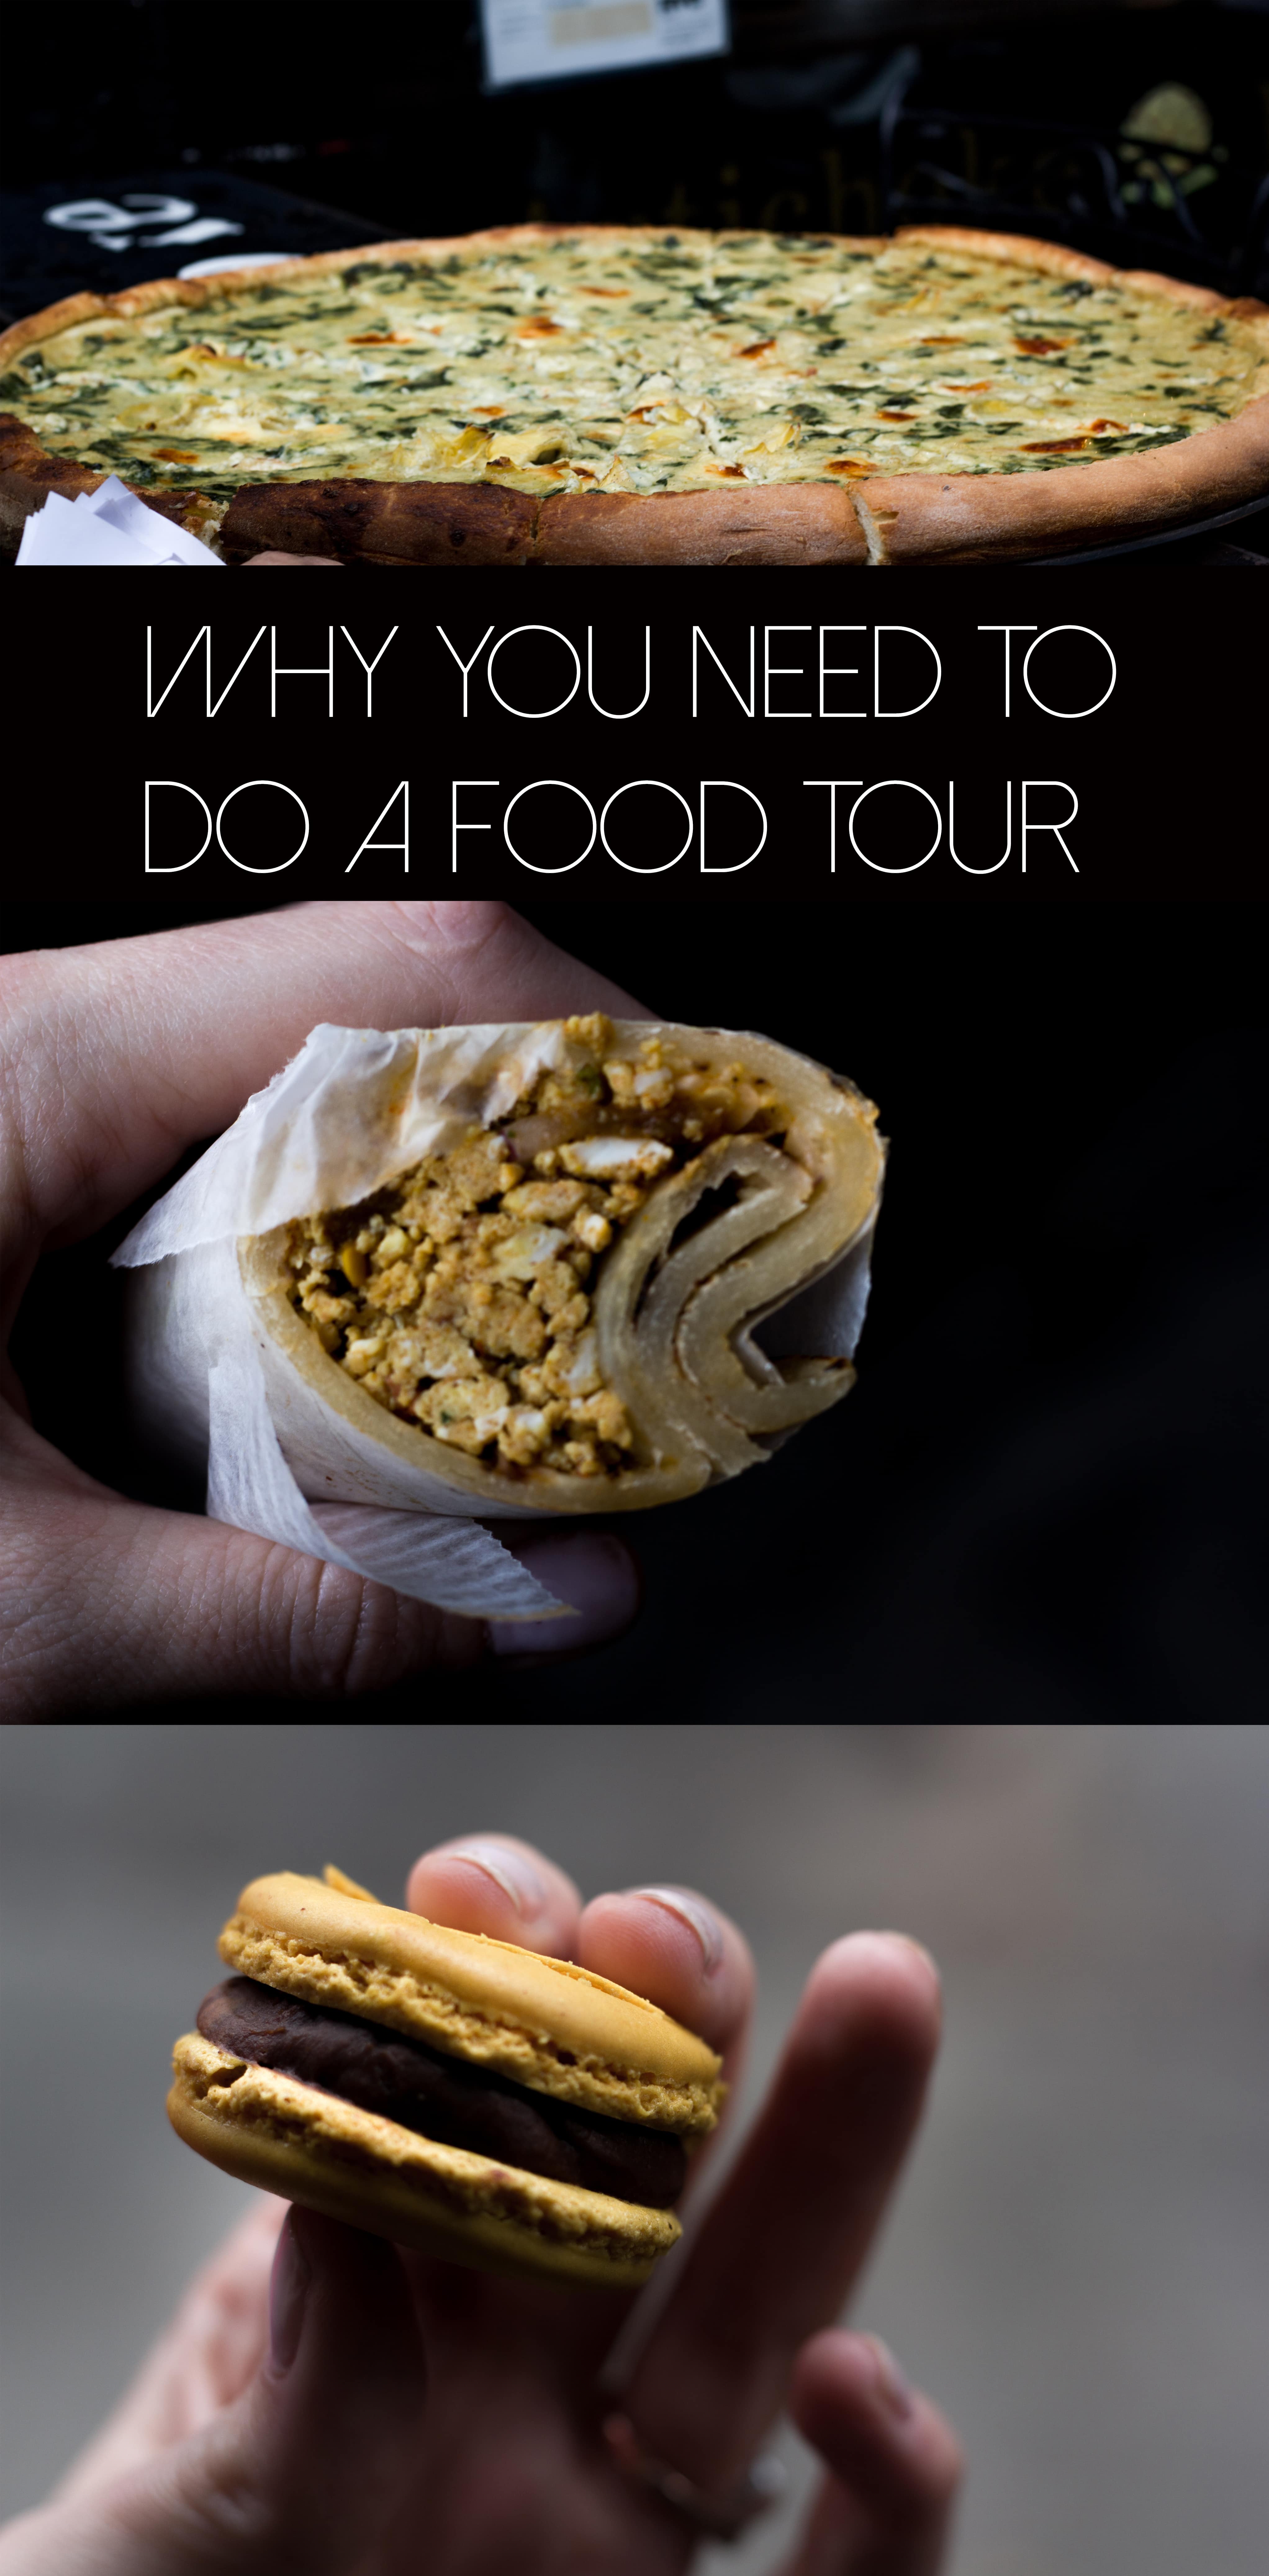 One of the best ways to see a new and even familiar place, is through the food! You need to do a food tour on your next vacation. Here's why.